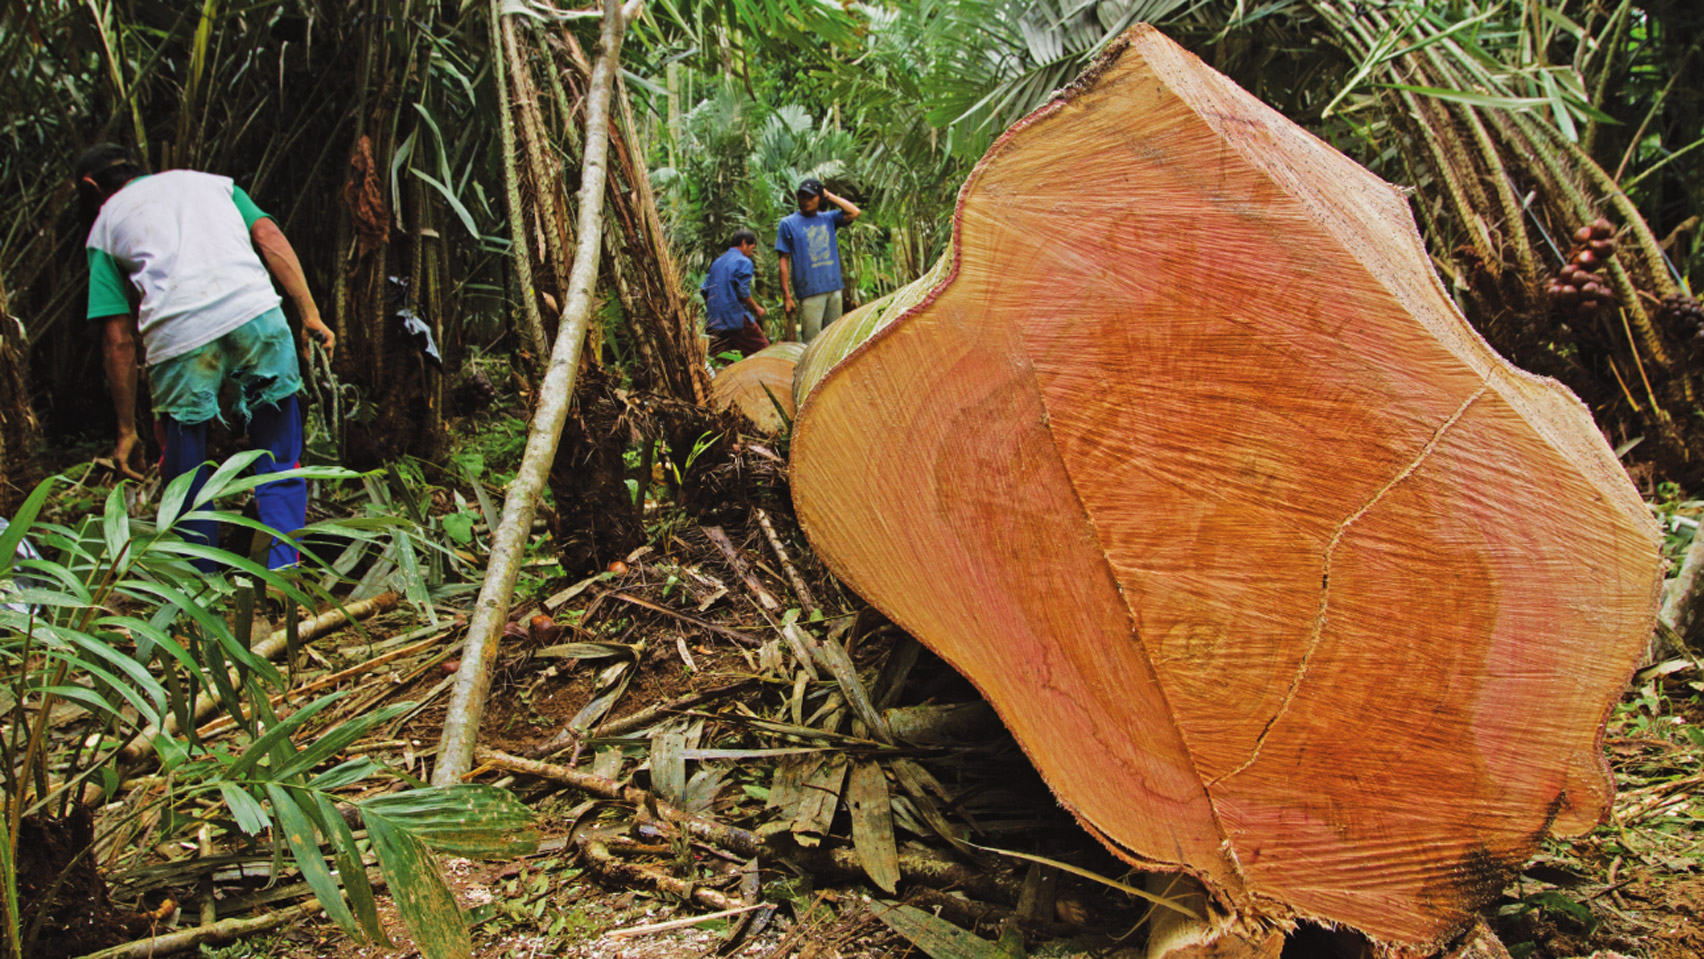 Call for entries to Timber Trade Federation's Conversations about Climate Change competition - Dezeen